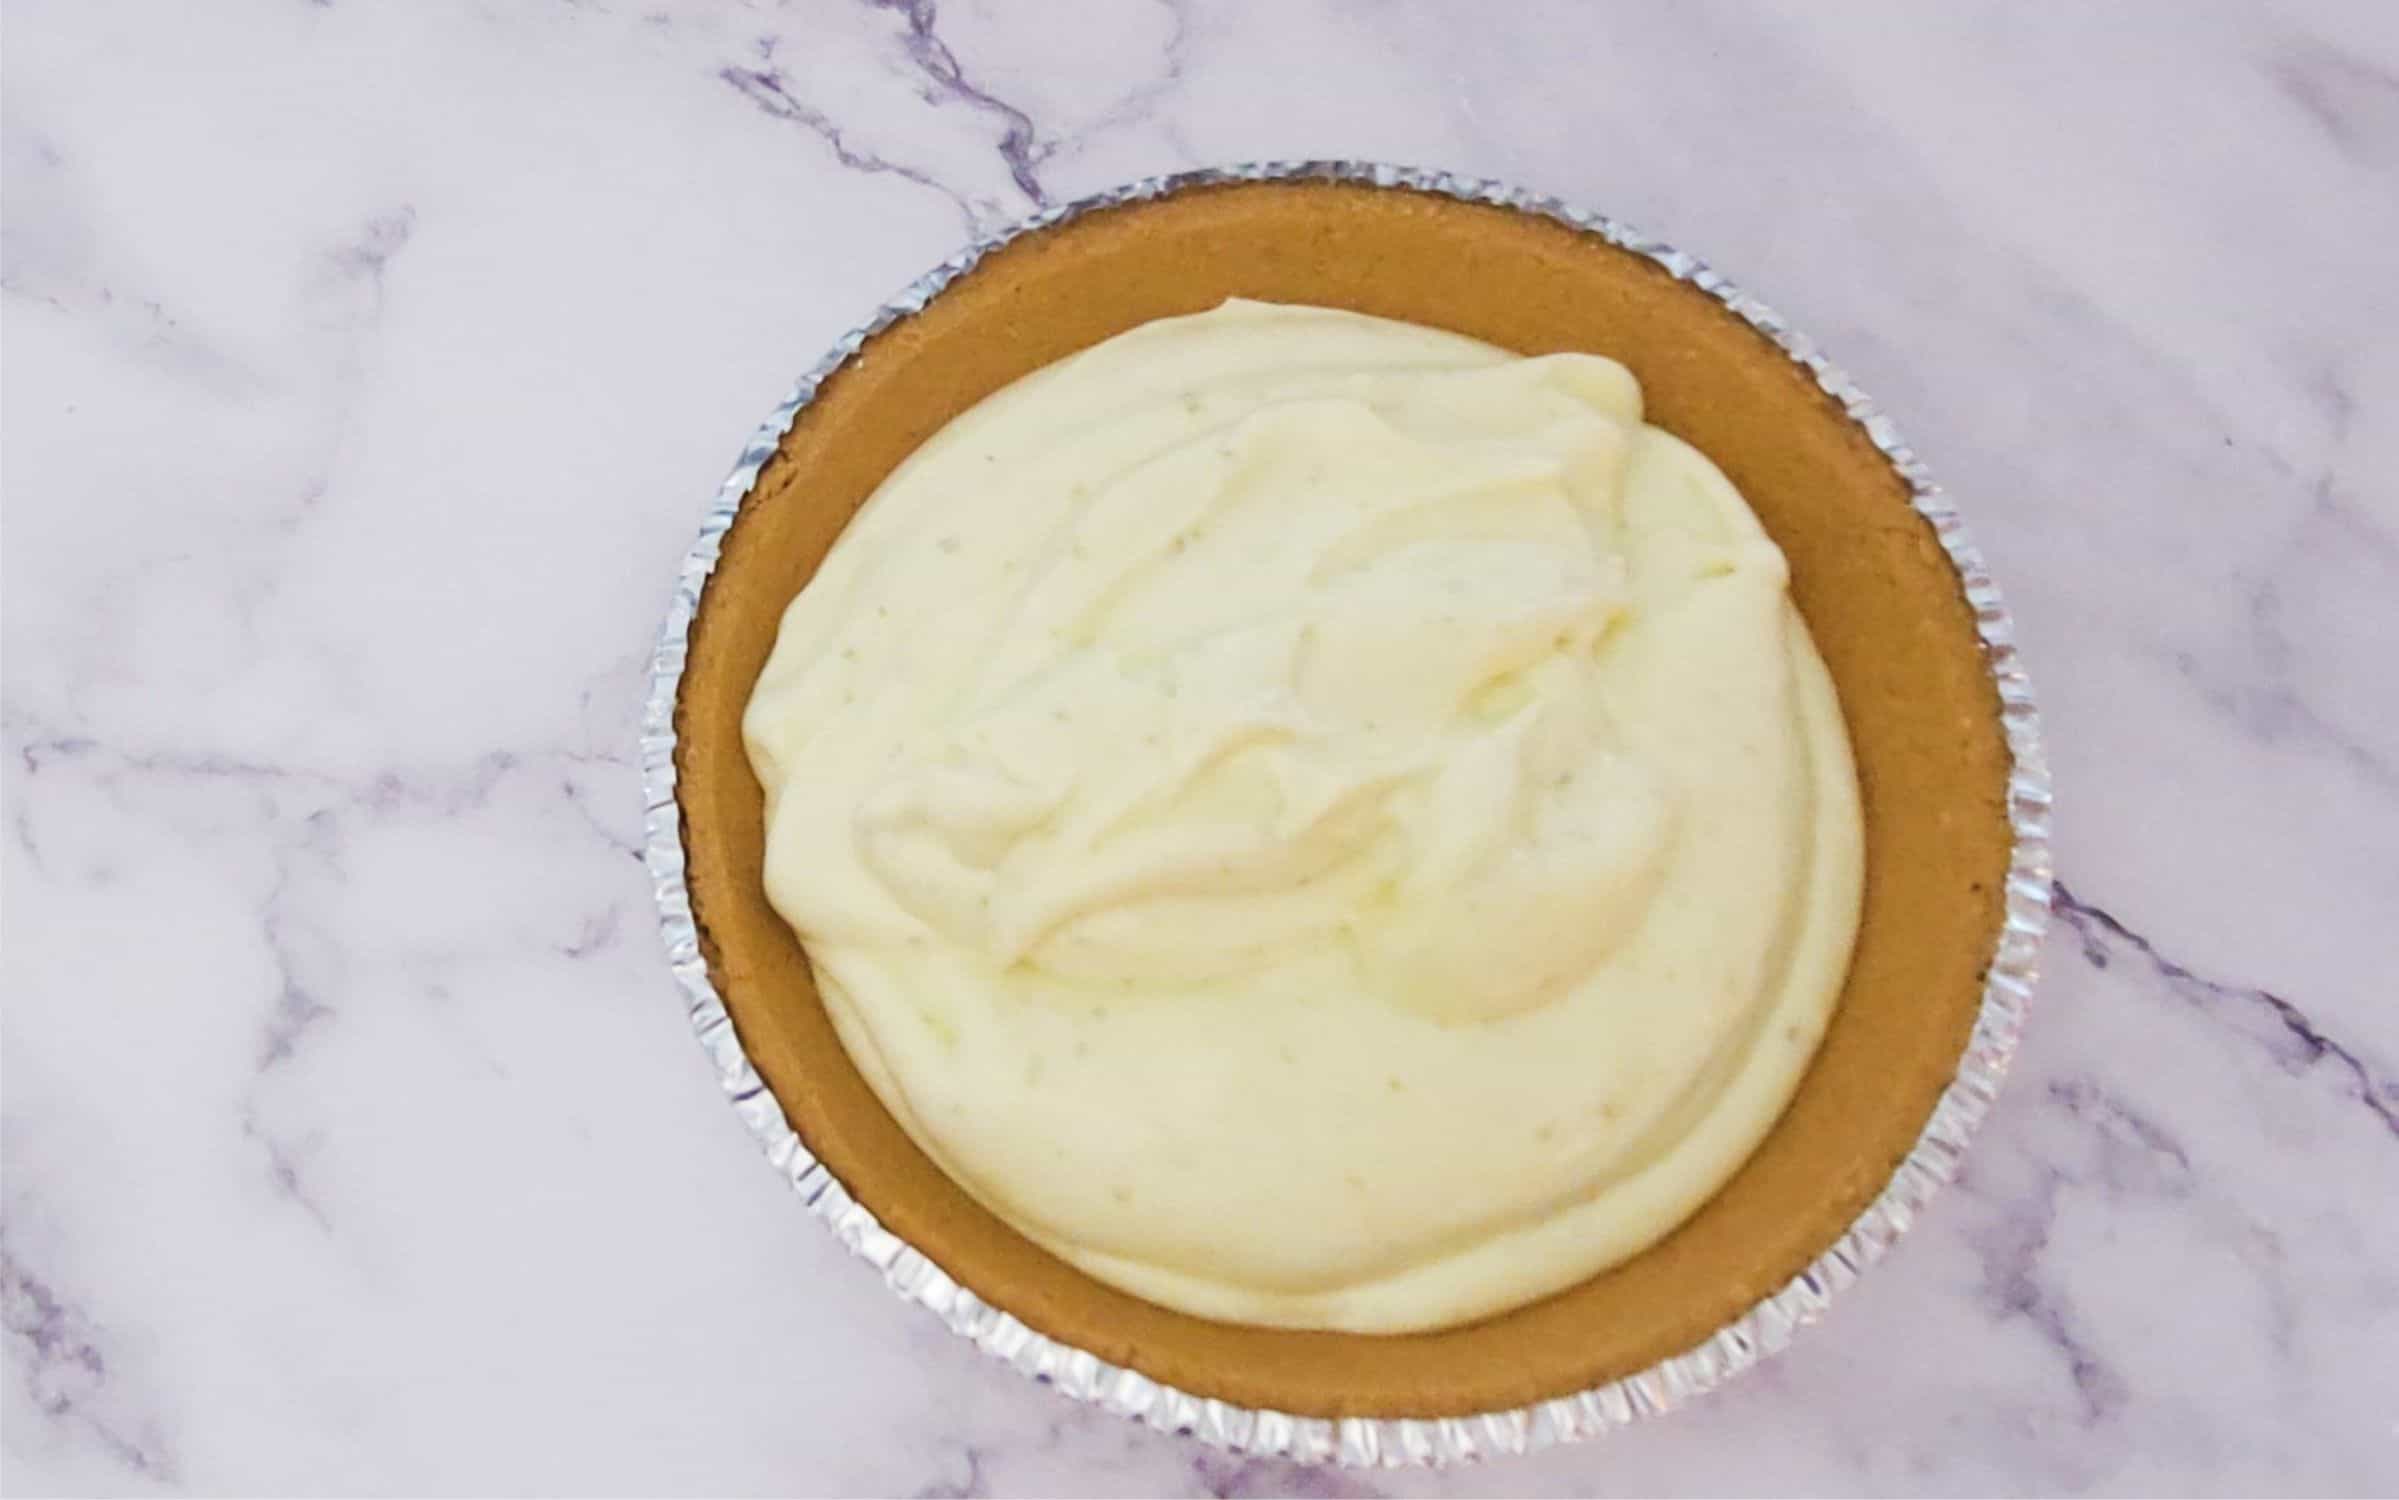 lime chiffon filling poured into purchased graham cracker crust